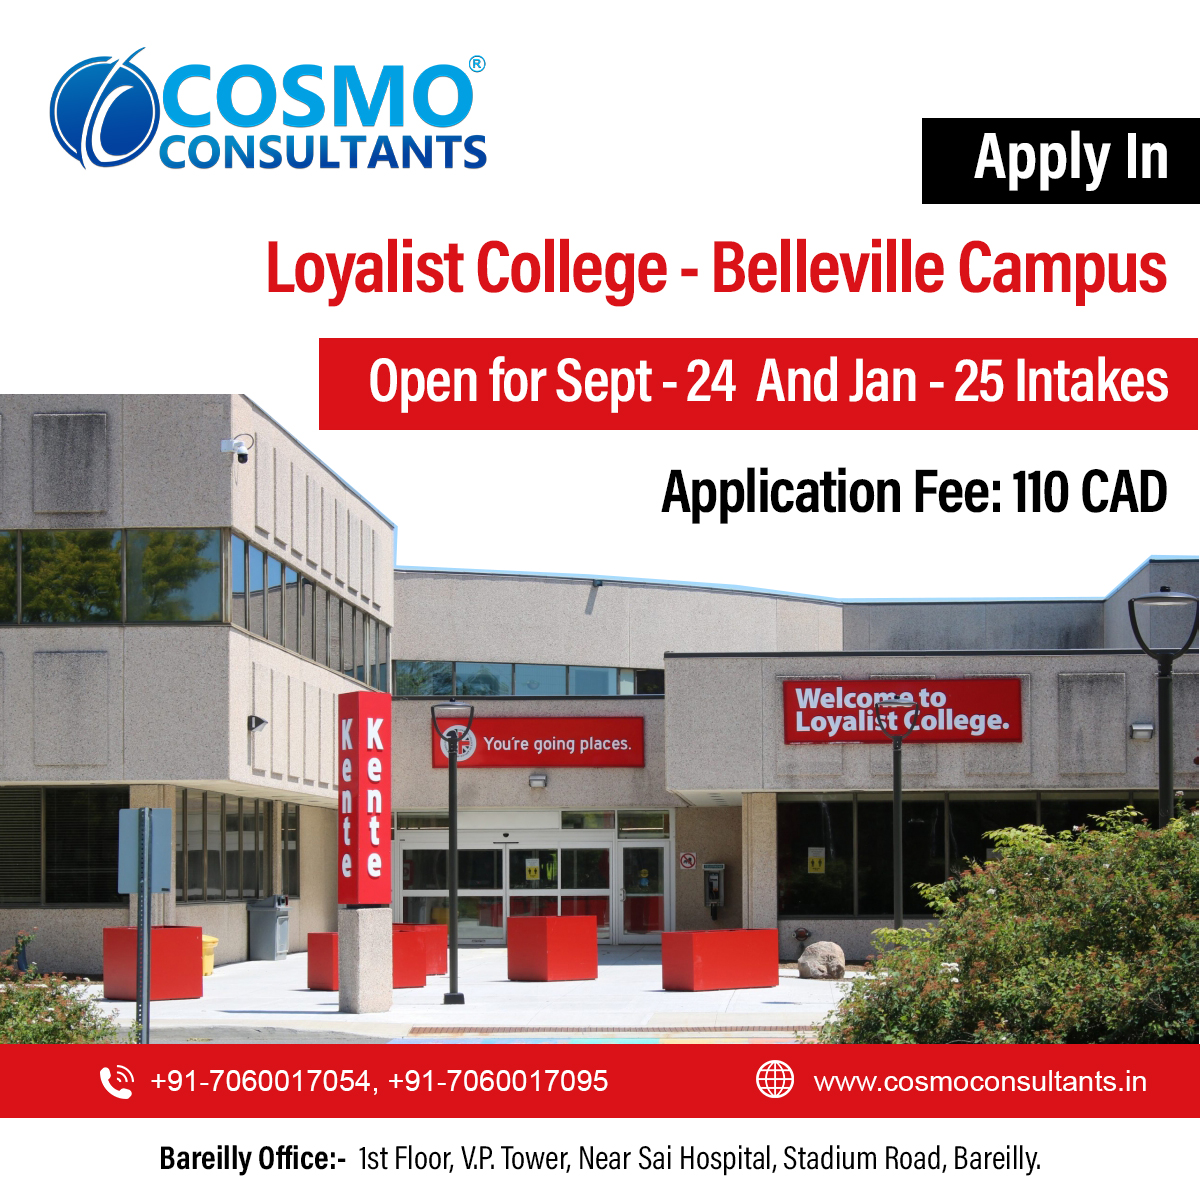 Exciting news! #LoyalistCollege - #BellevilleCampus is now accepting applications for both Sept-24 and Jan-25 intakes, with an application fee of just 110 CAD. Don't miss out on this opportunity! Get a free consultation with #CosmoConsultants : 7060017054, 7060017095. #Canada